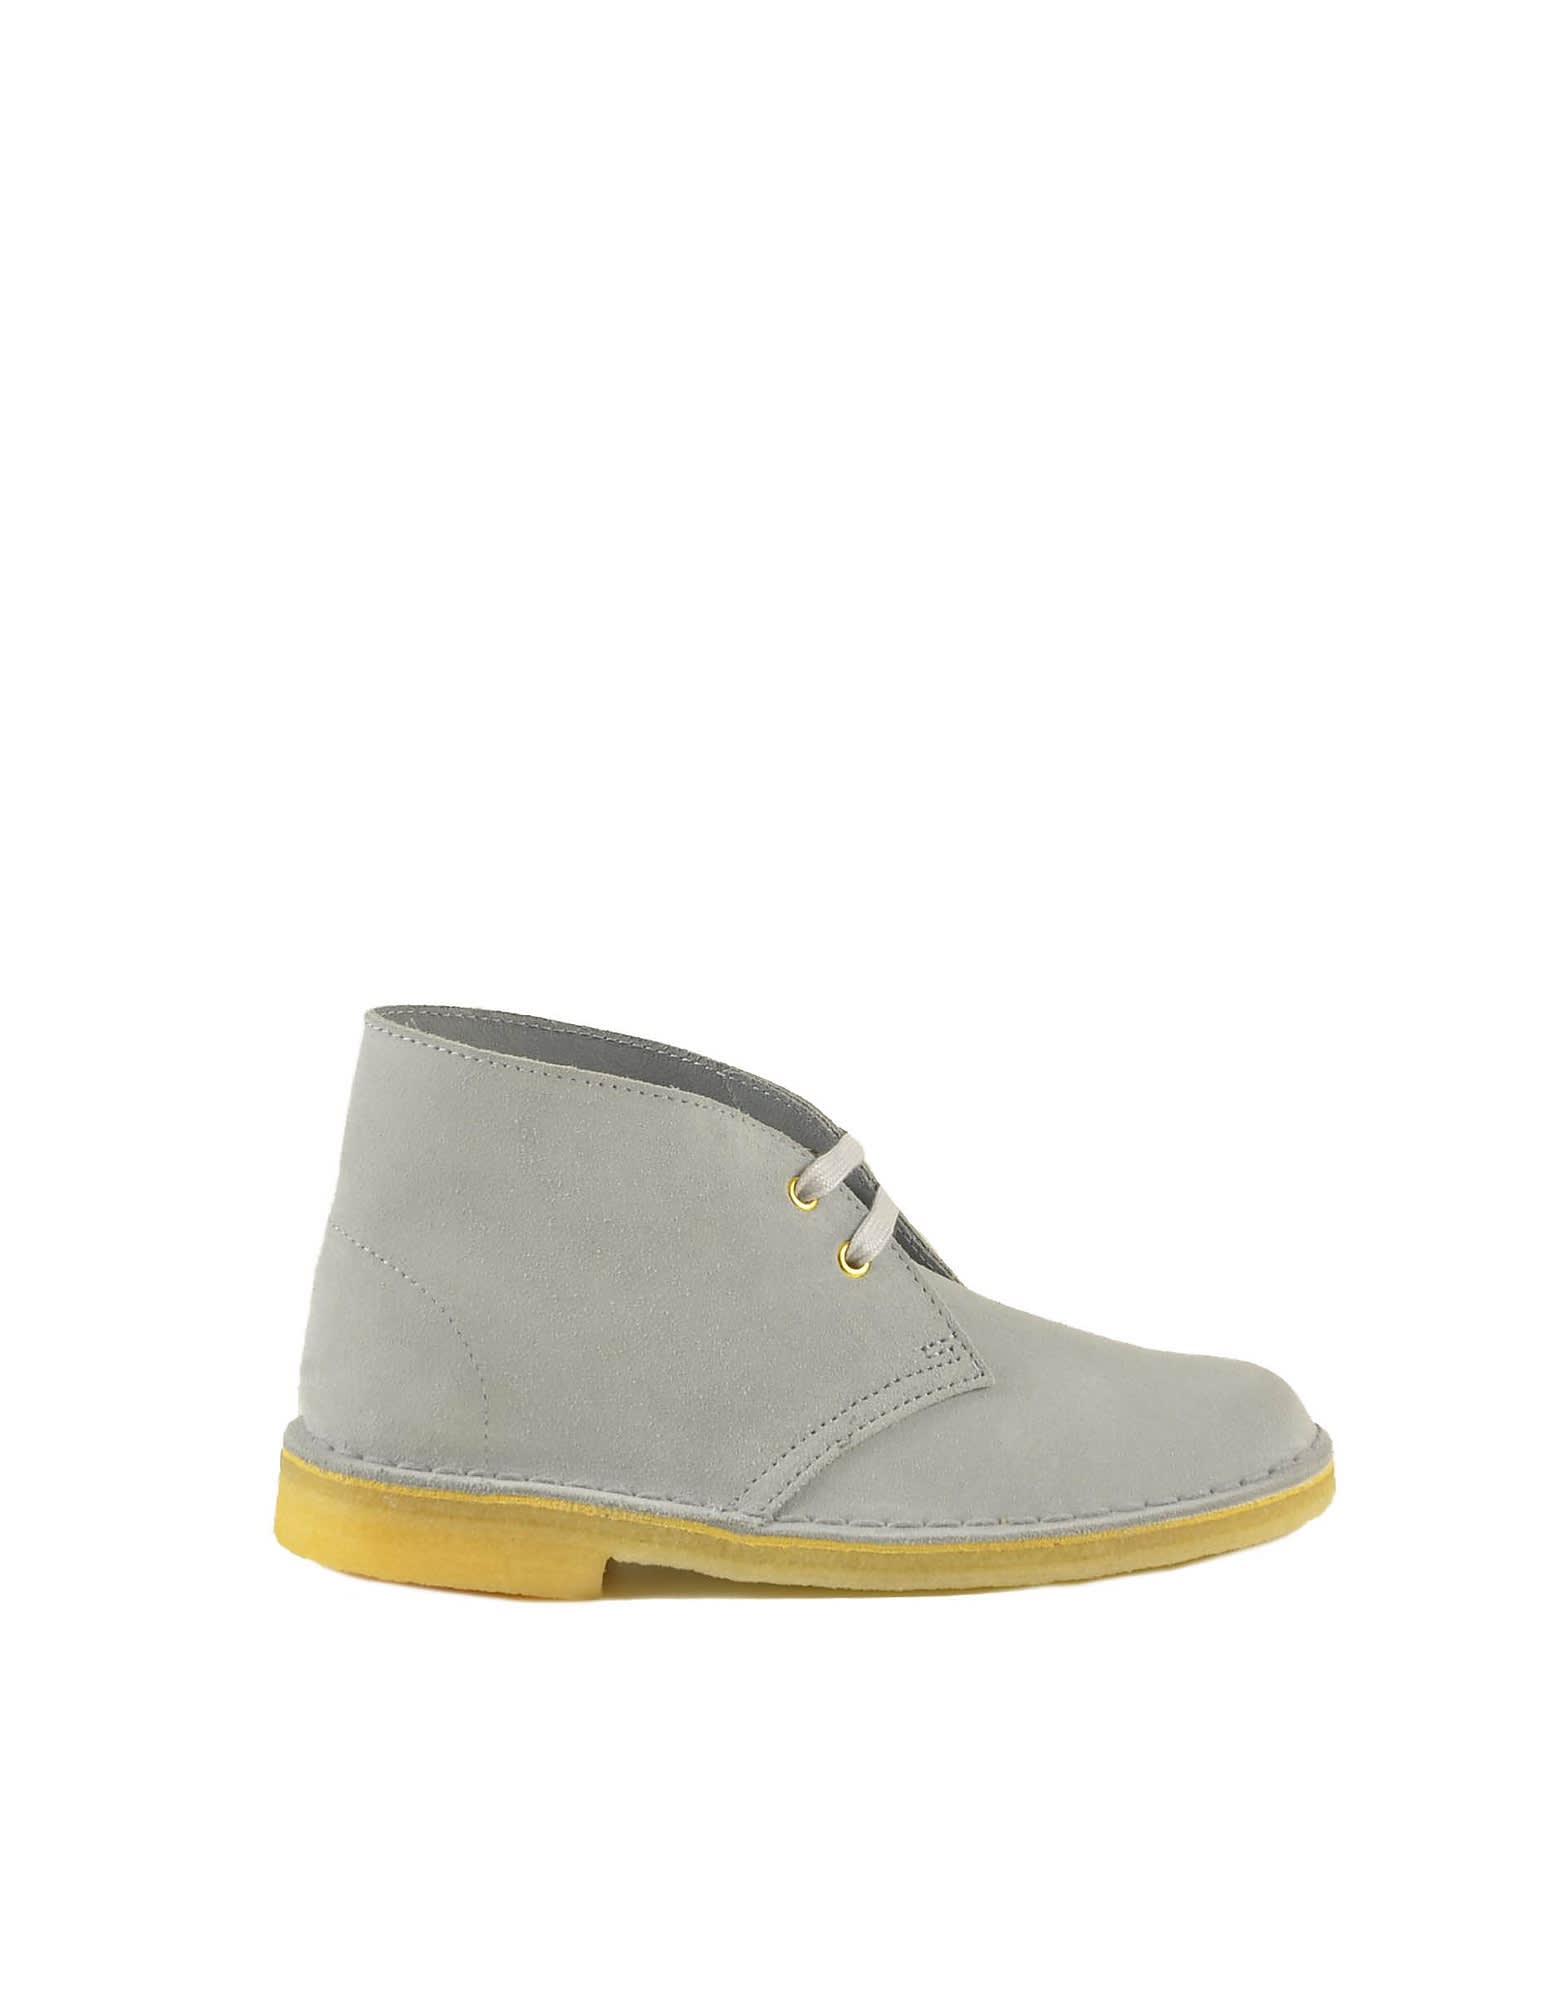 Clarks Womens Gray Shoes